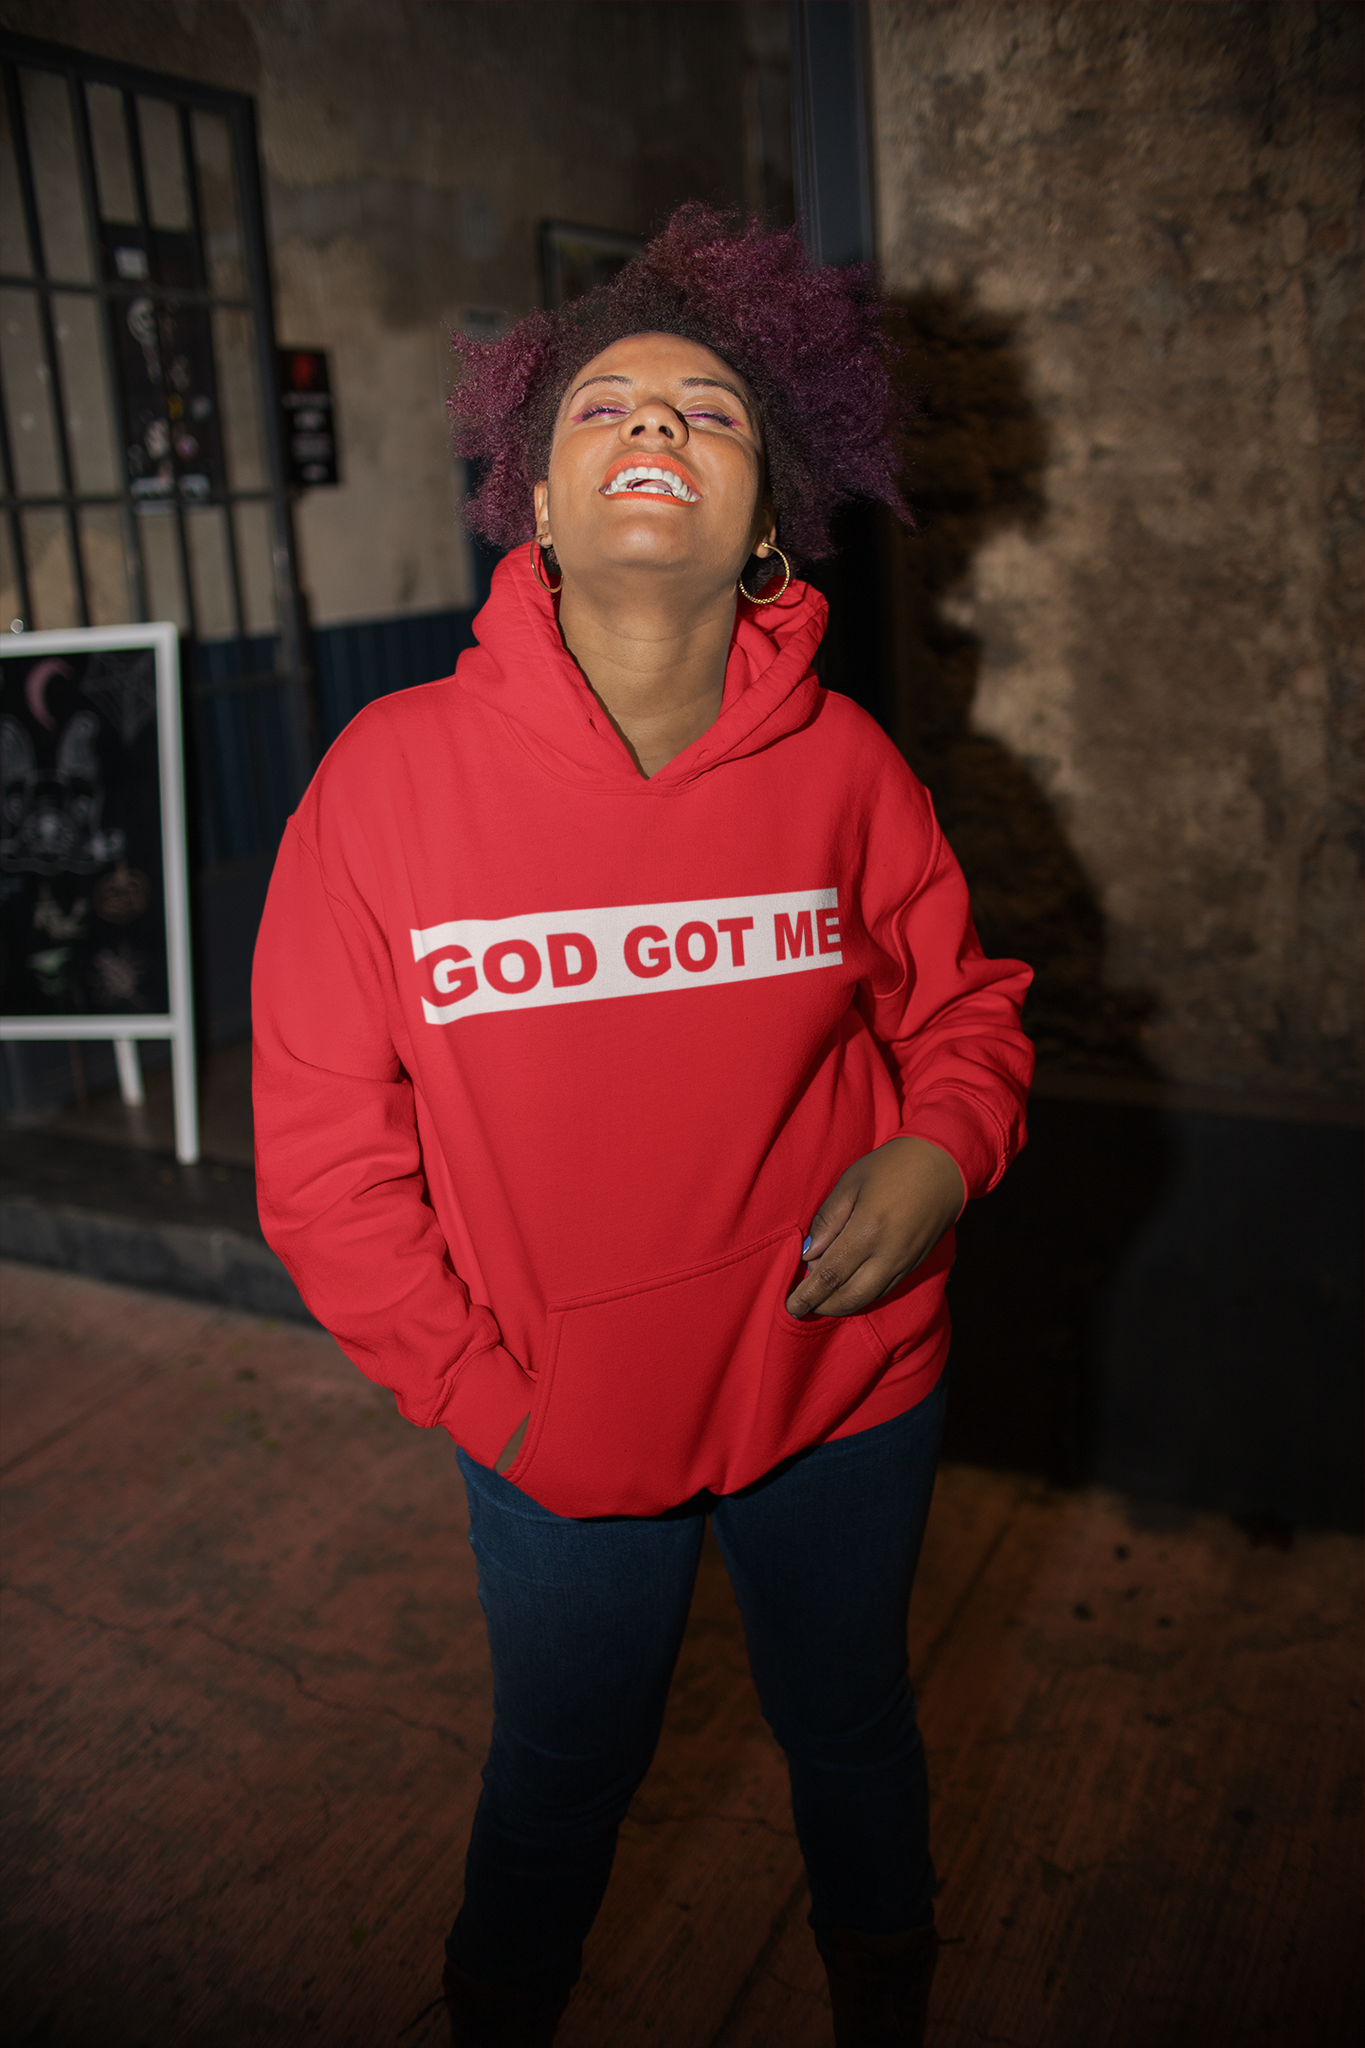 Inside Out Box Logo Hooded Sweatshirt Red